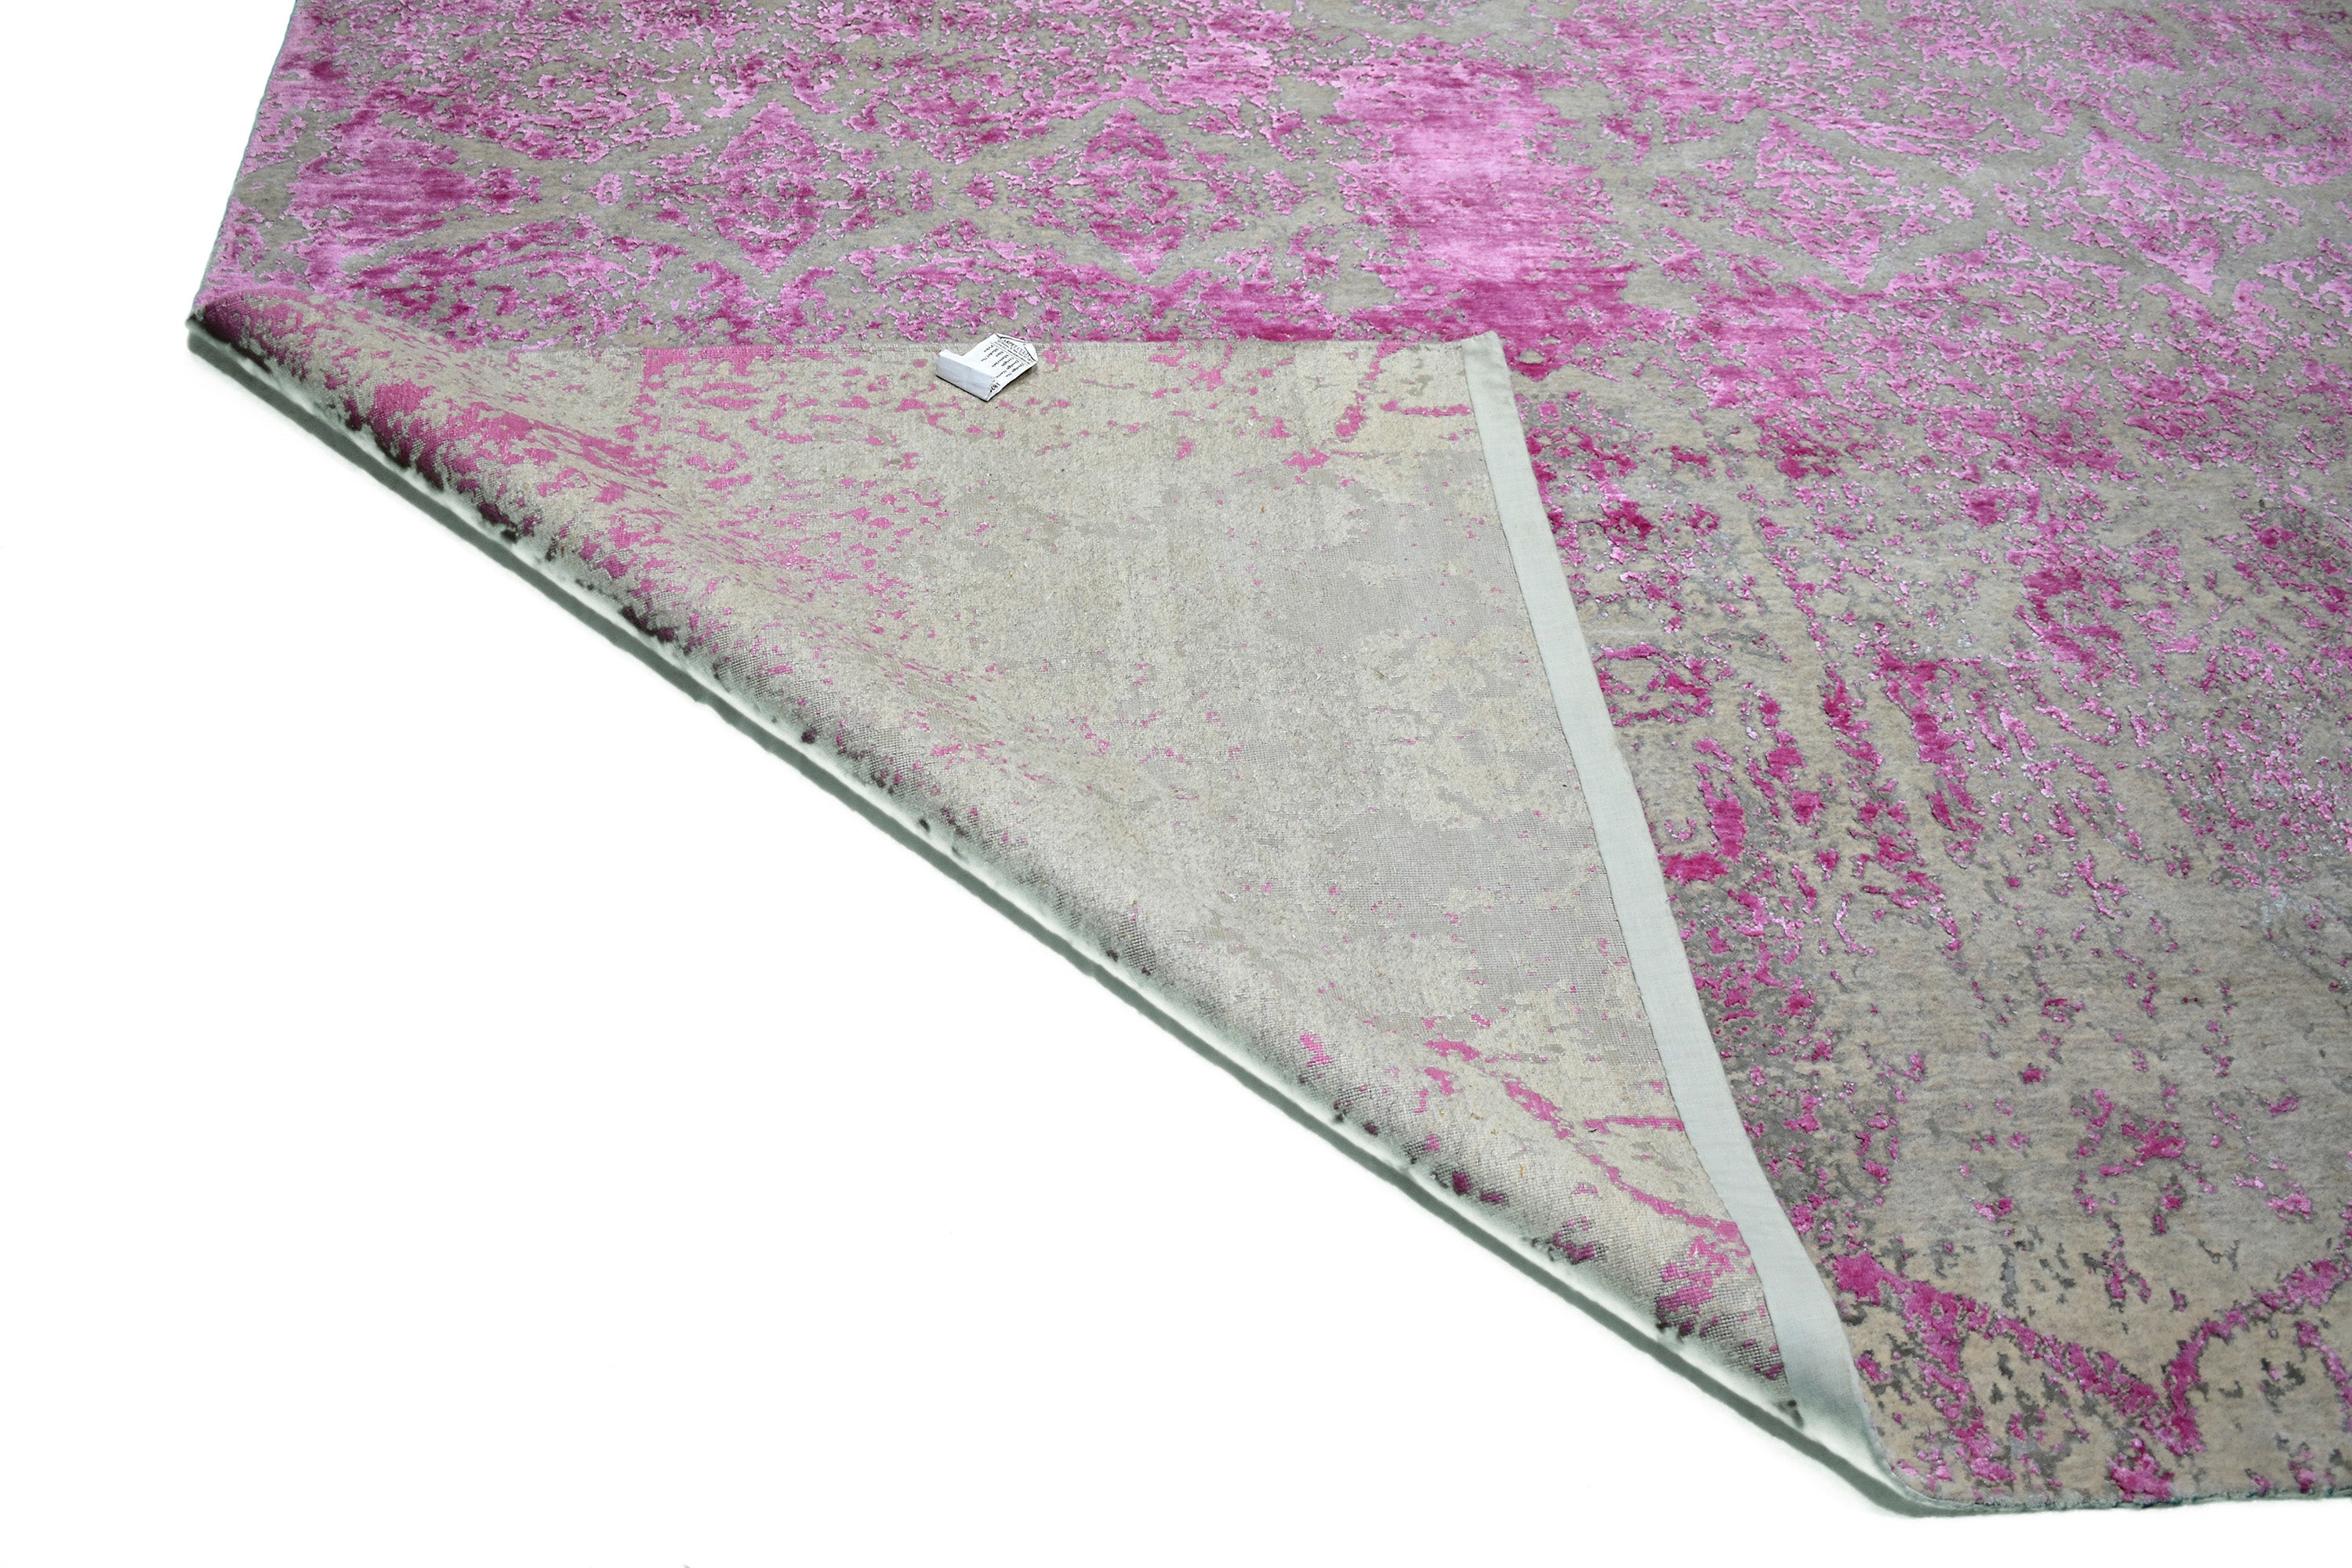 Distressed Transitional Pink Posh Silk And Wool > Design # 1825 > 8' - 4" X 9' - 11"